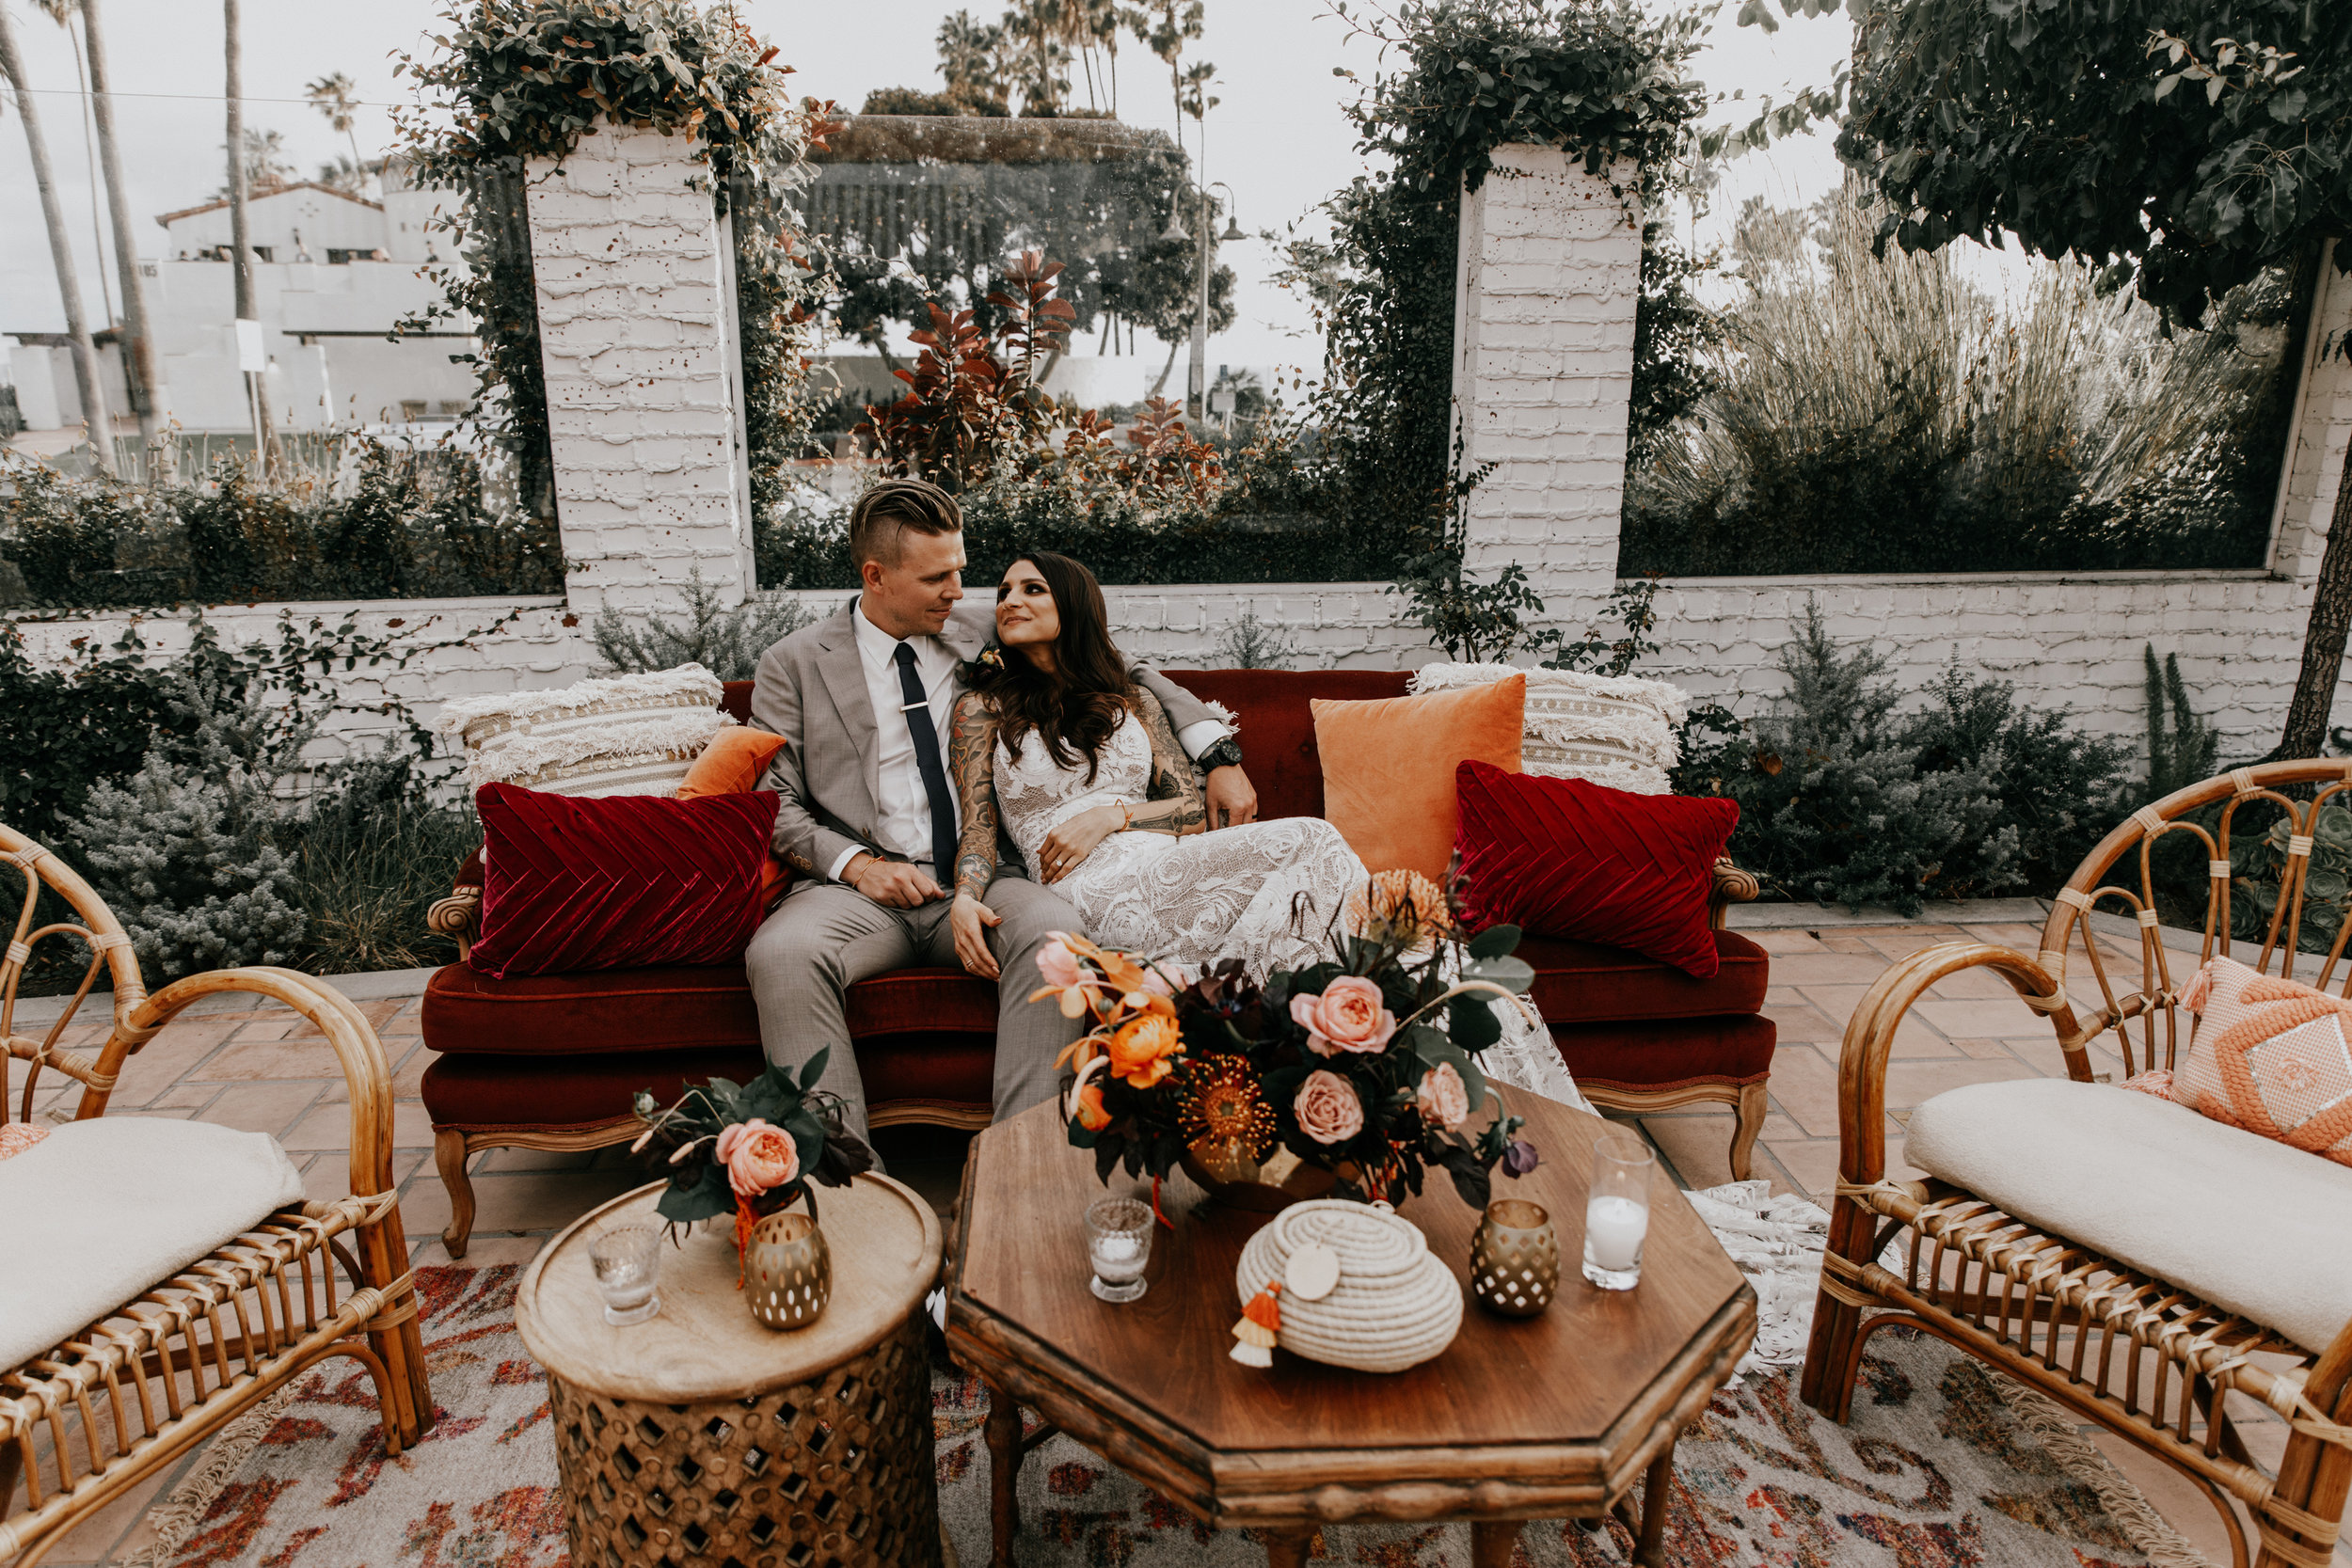 Exquisite Moroccan Wedding Decor Ideas For Your Reception! | WedMeGood